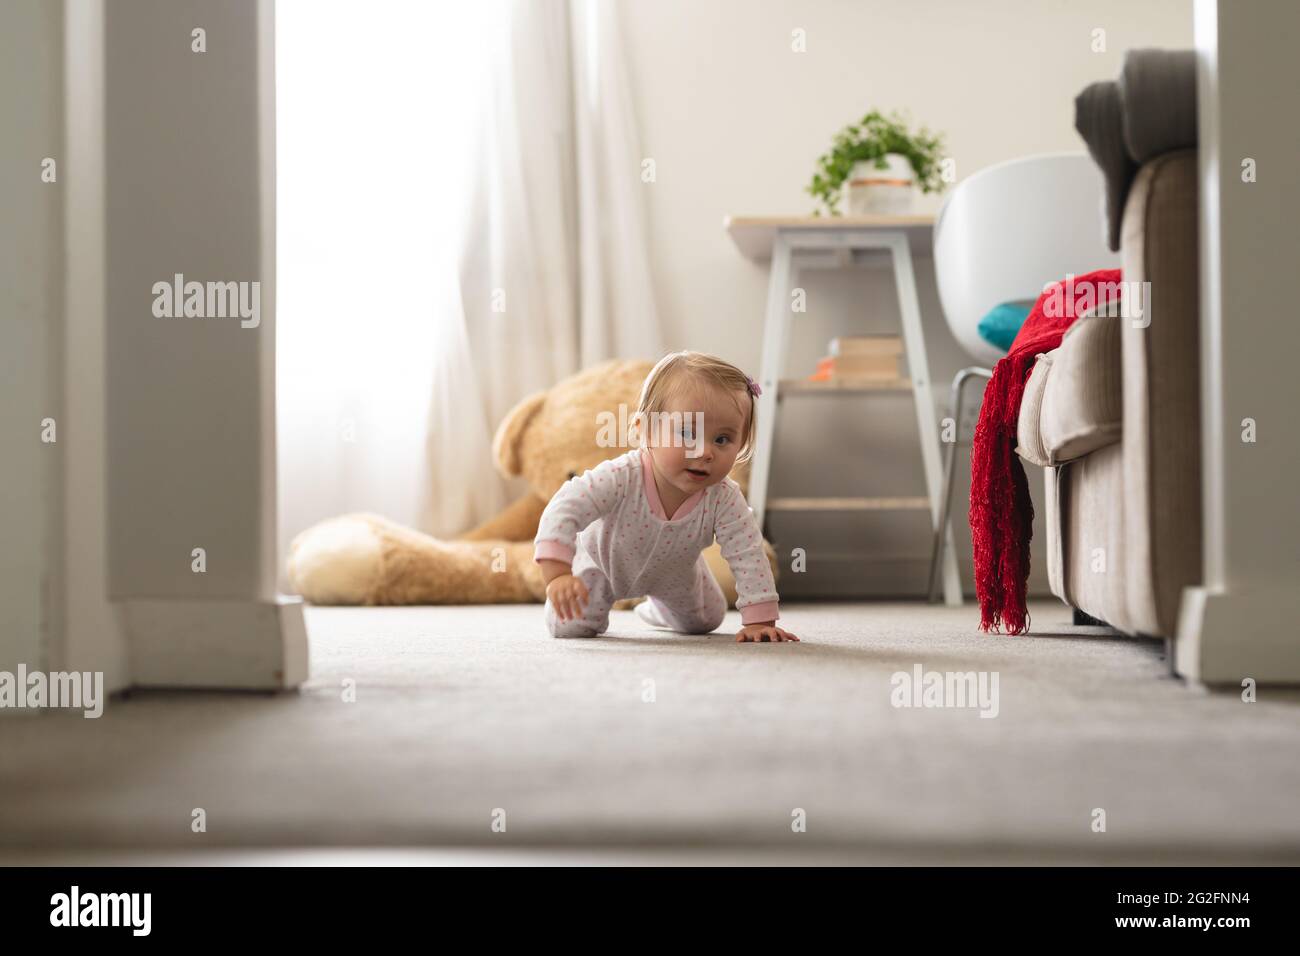 Caucasian cute baby crawling on the floor at home Stock Photo